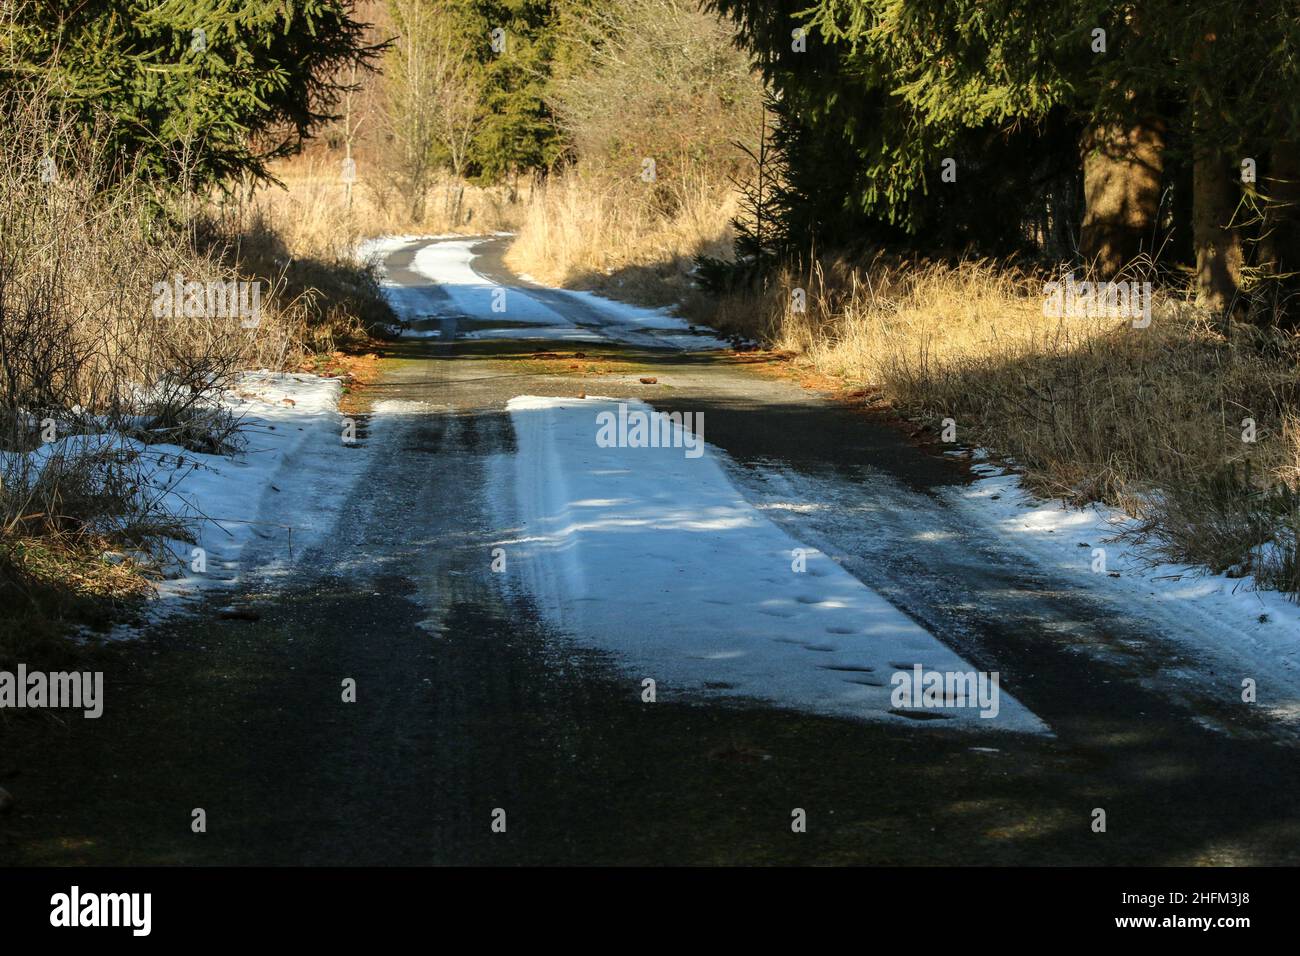 The detail of the narrow road in winter with risky driving conditions on snow and ice or black ice hiding in the shadows. Stock Photo